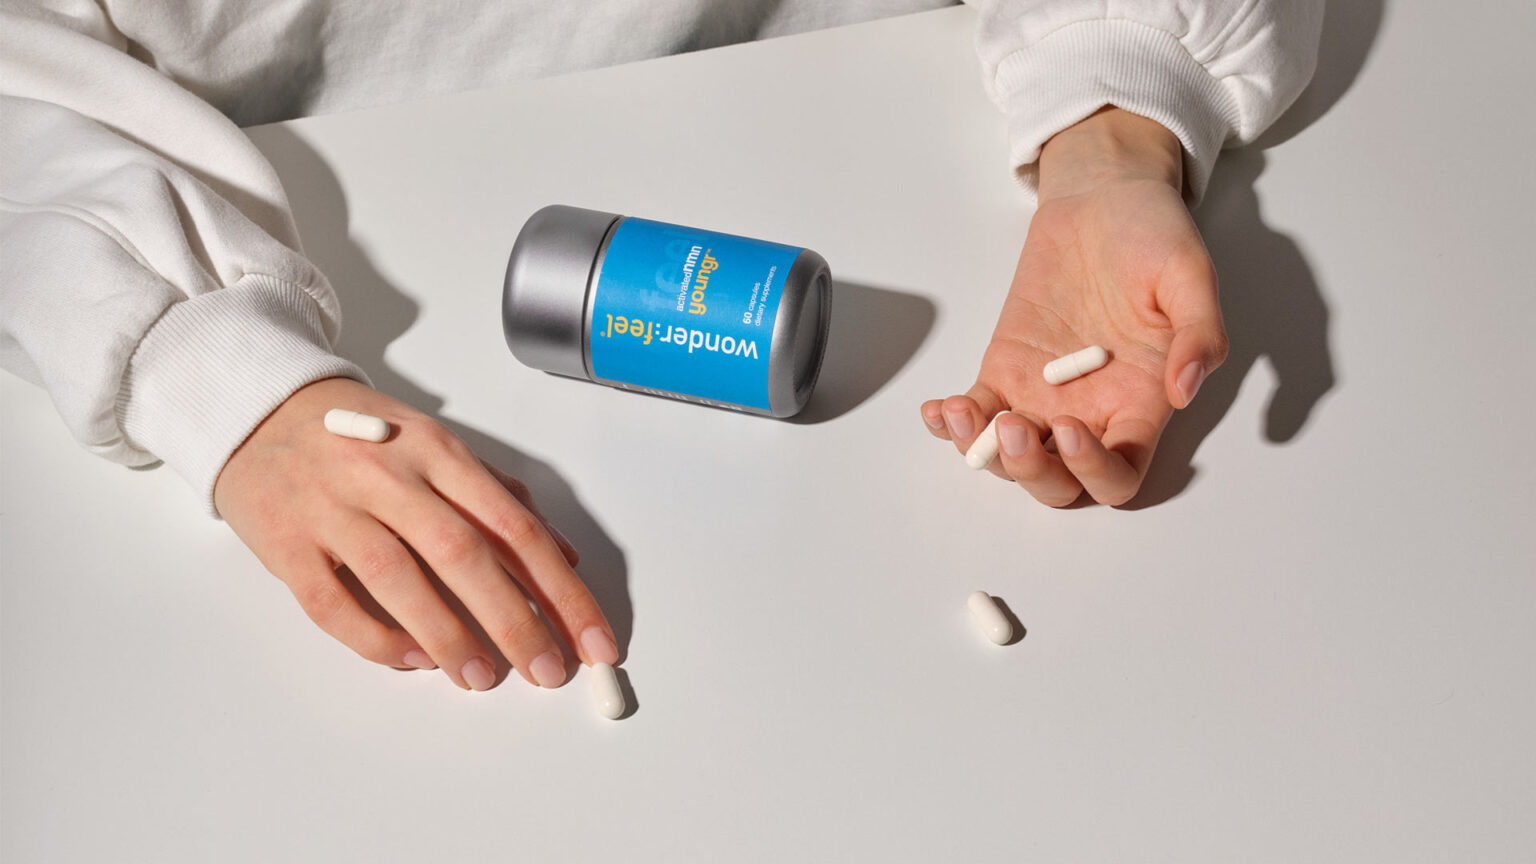 A Wonderfeel Youngr bottle and hands holding NMN capsules.